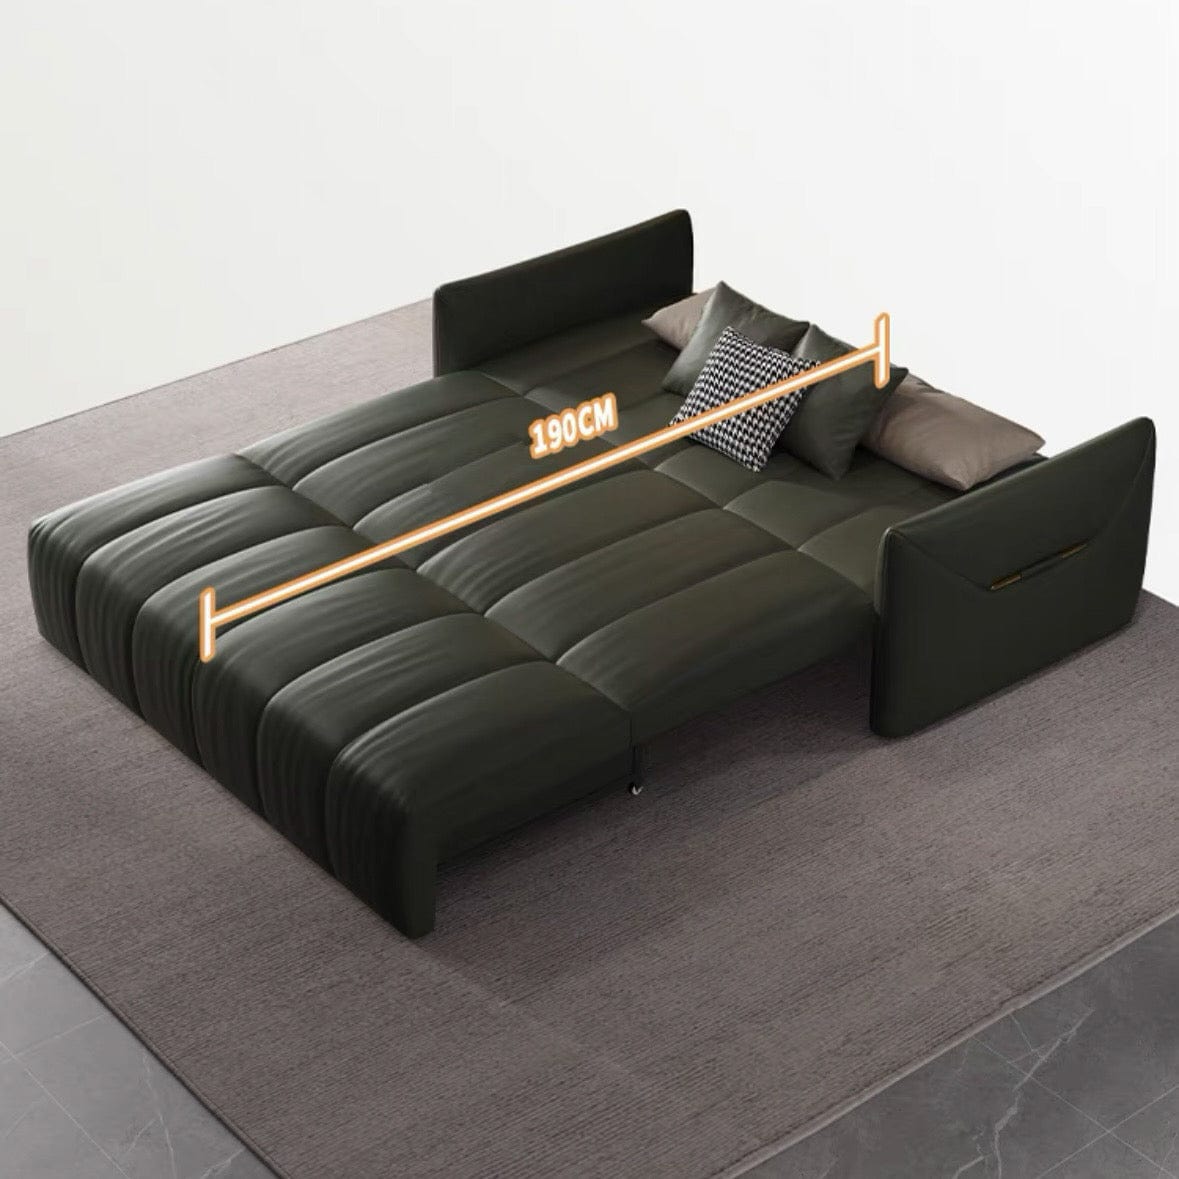 home-atelier-f31a Reane Electric Sofa Bed